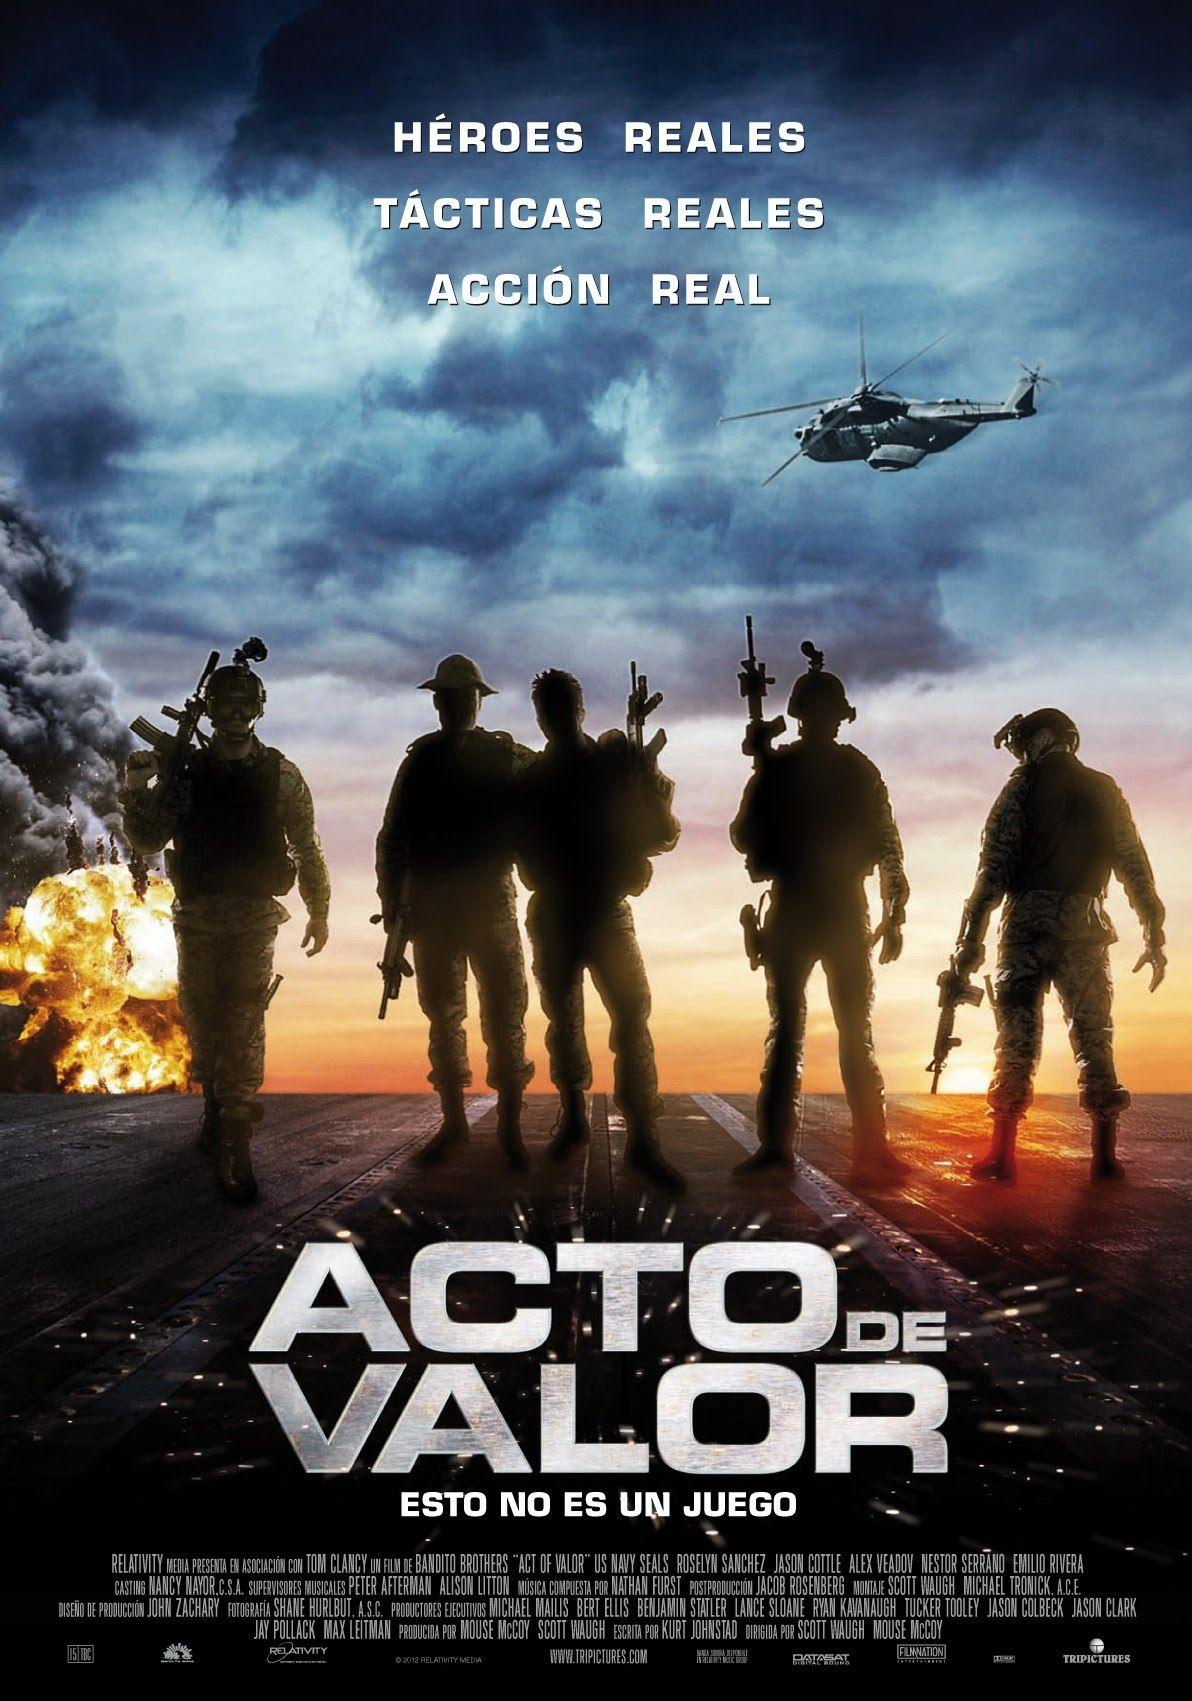 Acto de valor. Movie posters. Act of valor, Movie posters